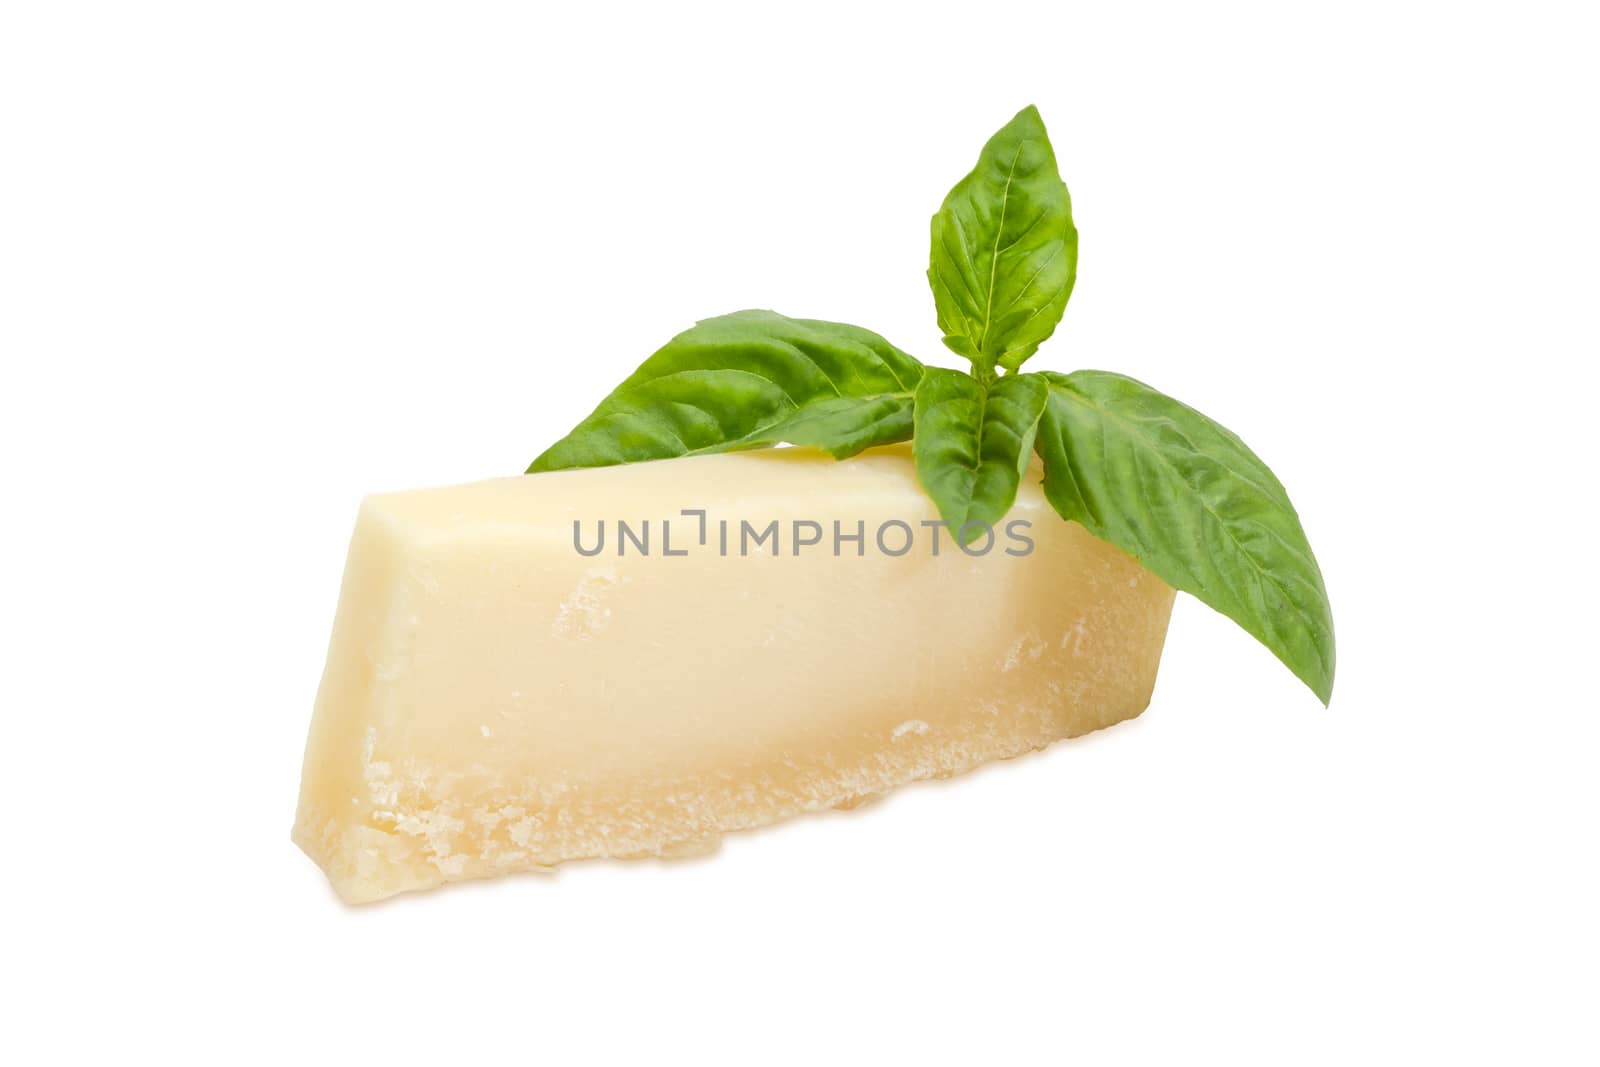 Piece of the parmesan cheese and twig of green basil on a white background
